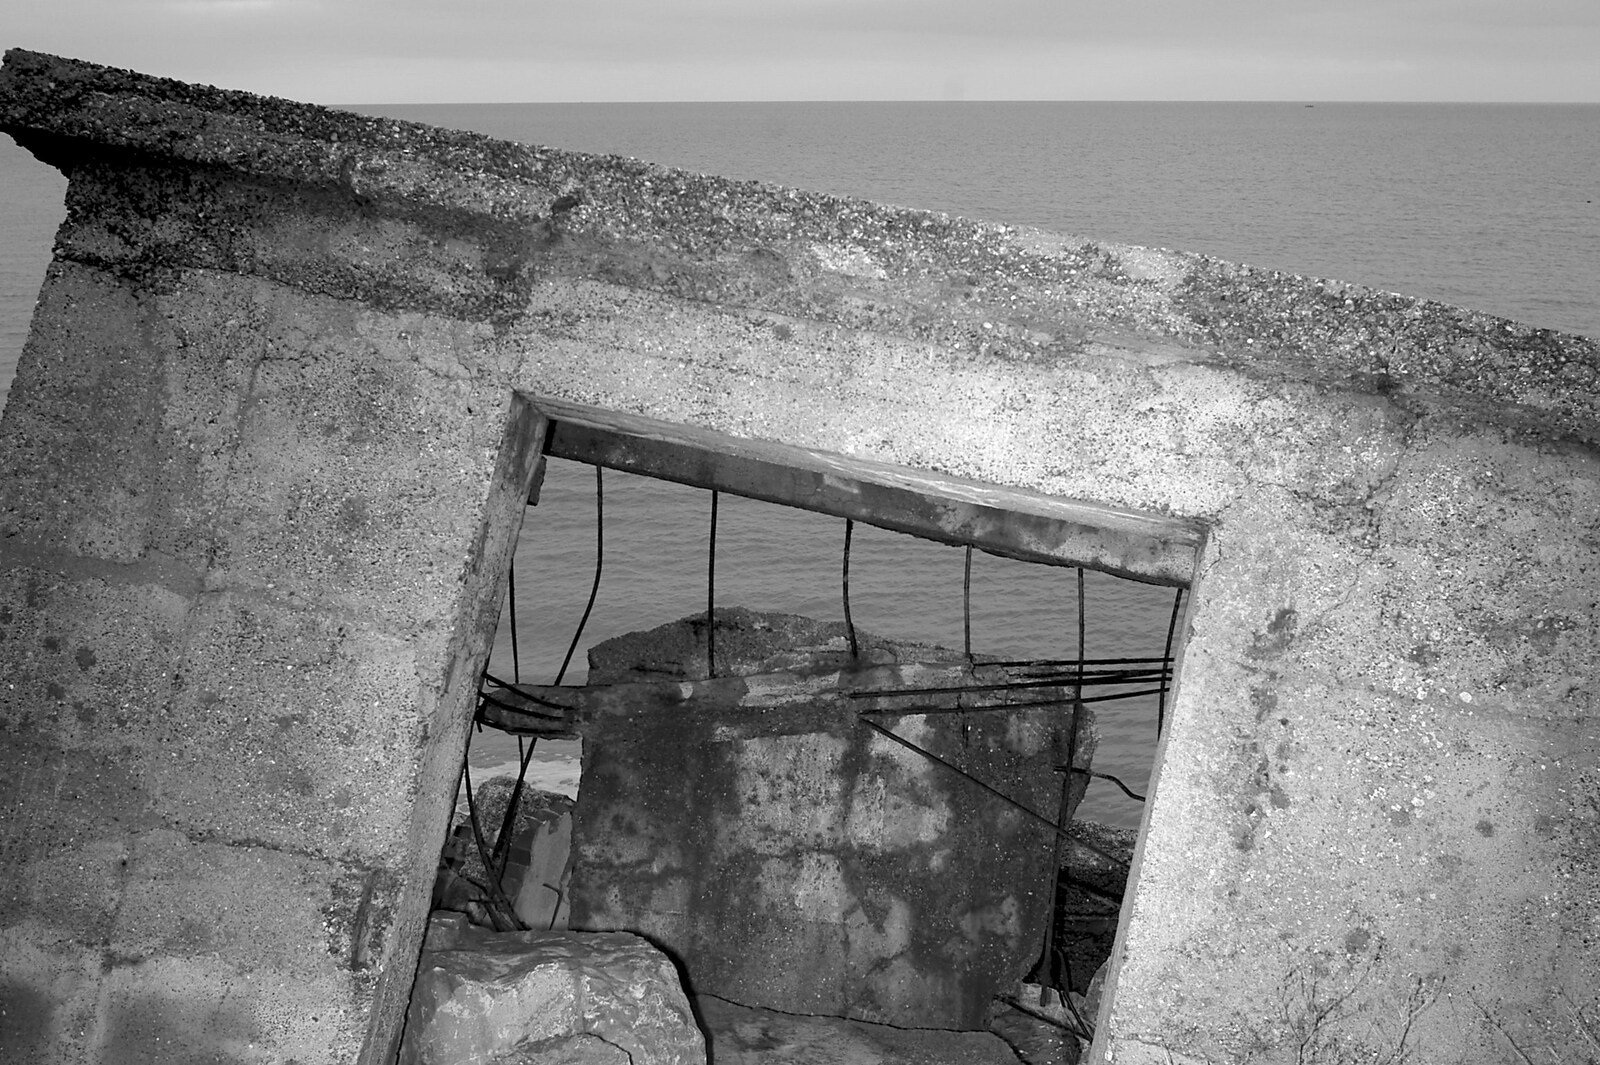 The remains of concrete from A Trip to East Lane, Bawdsey, Suffolk - 28th November 2004